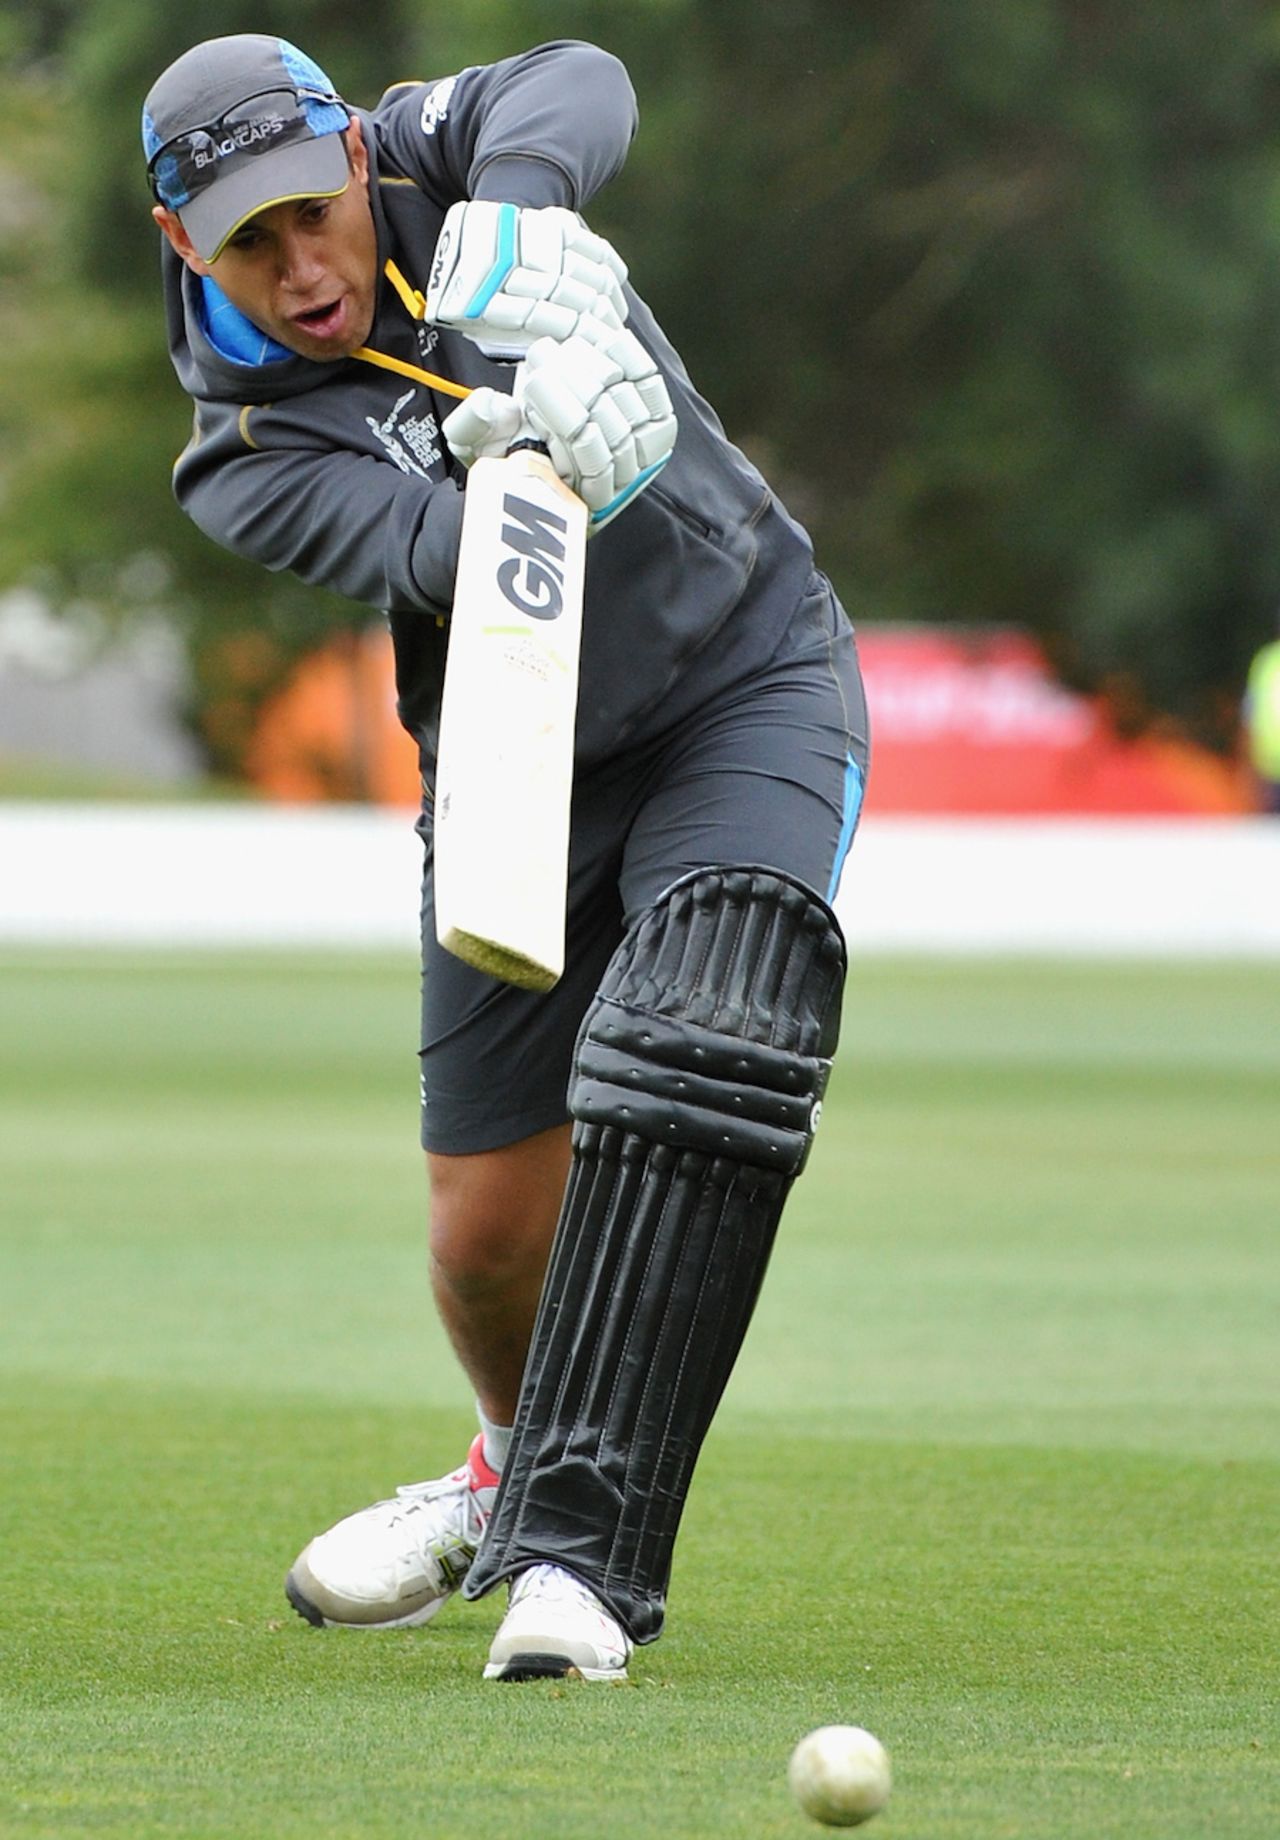 Ross Taylor warms-up before the warm-up match, New Zealand v Zimbabwe, World Cup warm-up match, Lincoln, February 9, 2015